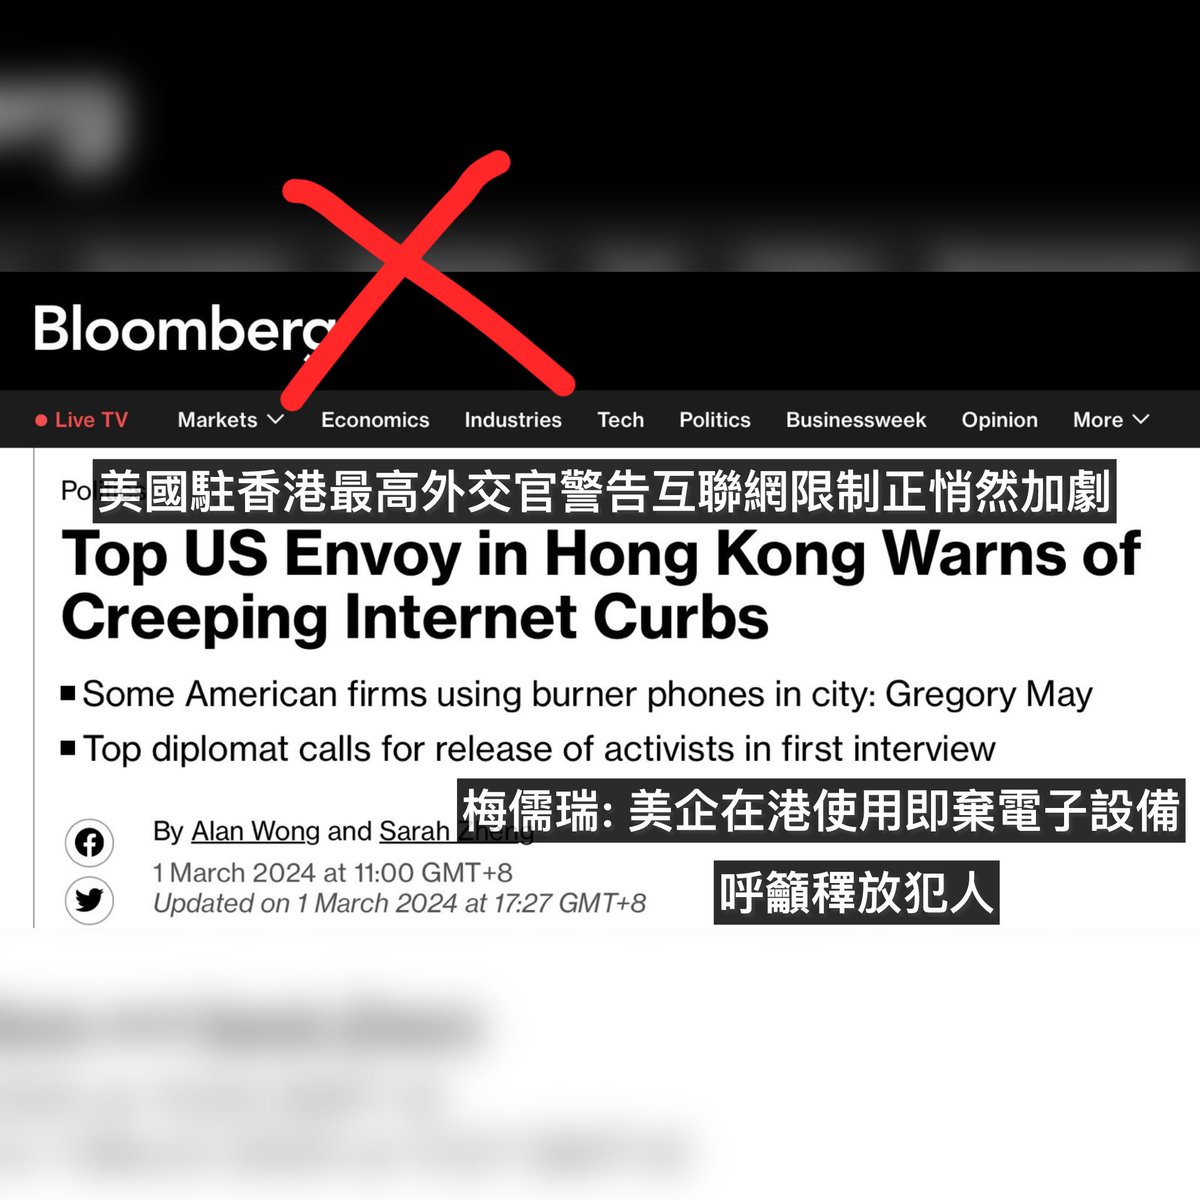 The US Consul General is yet again exerting pressure on American firms and the independent judicial system in HK. Is this what we expect of a diplomat? 美國總領事又一次對香港的美國企業和獨立司法體系施加壓力。這符合我們對一位外交官的期望嗎？ #gregorymay #Bloomberg